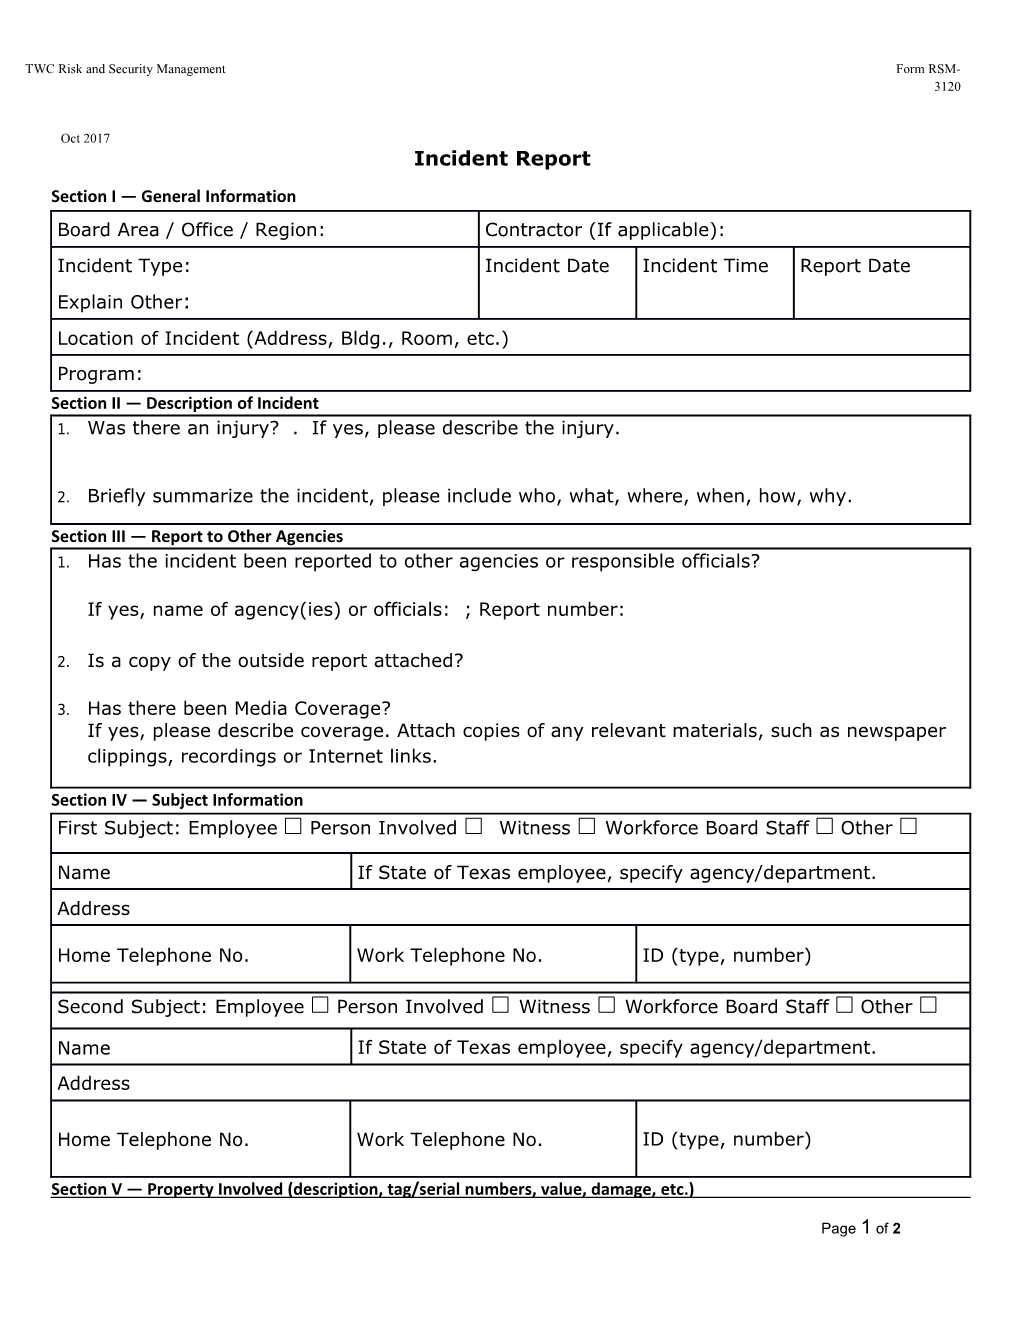 TWC Risk and Security Management Form RSM-3120